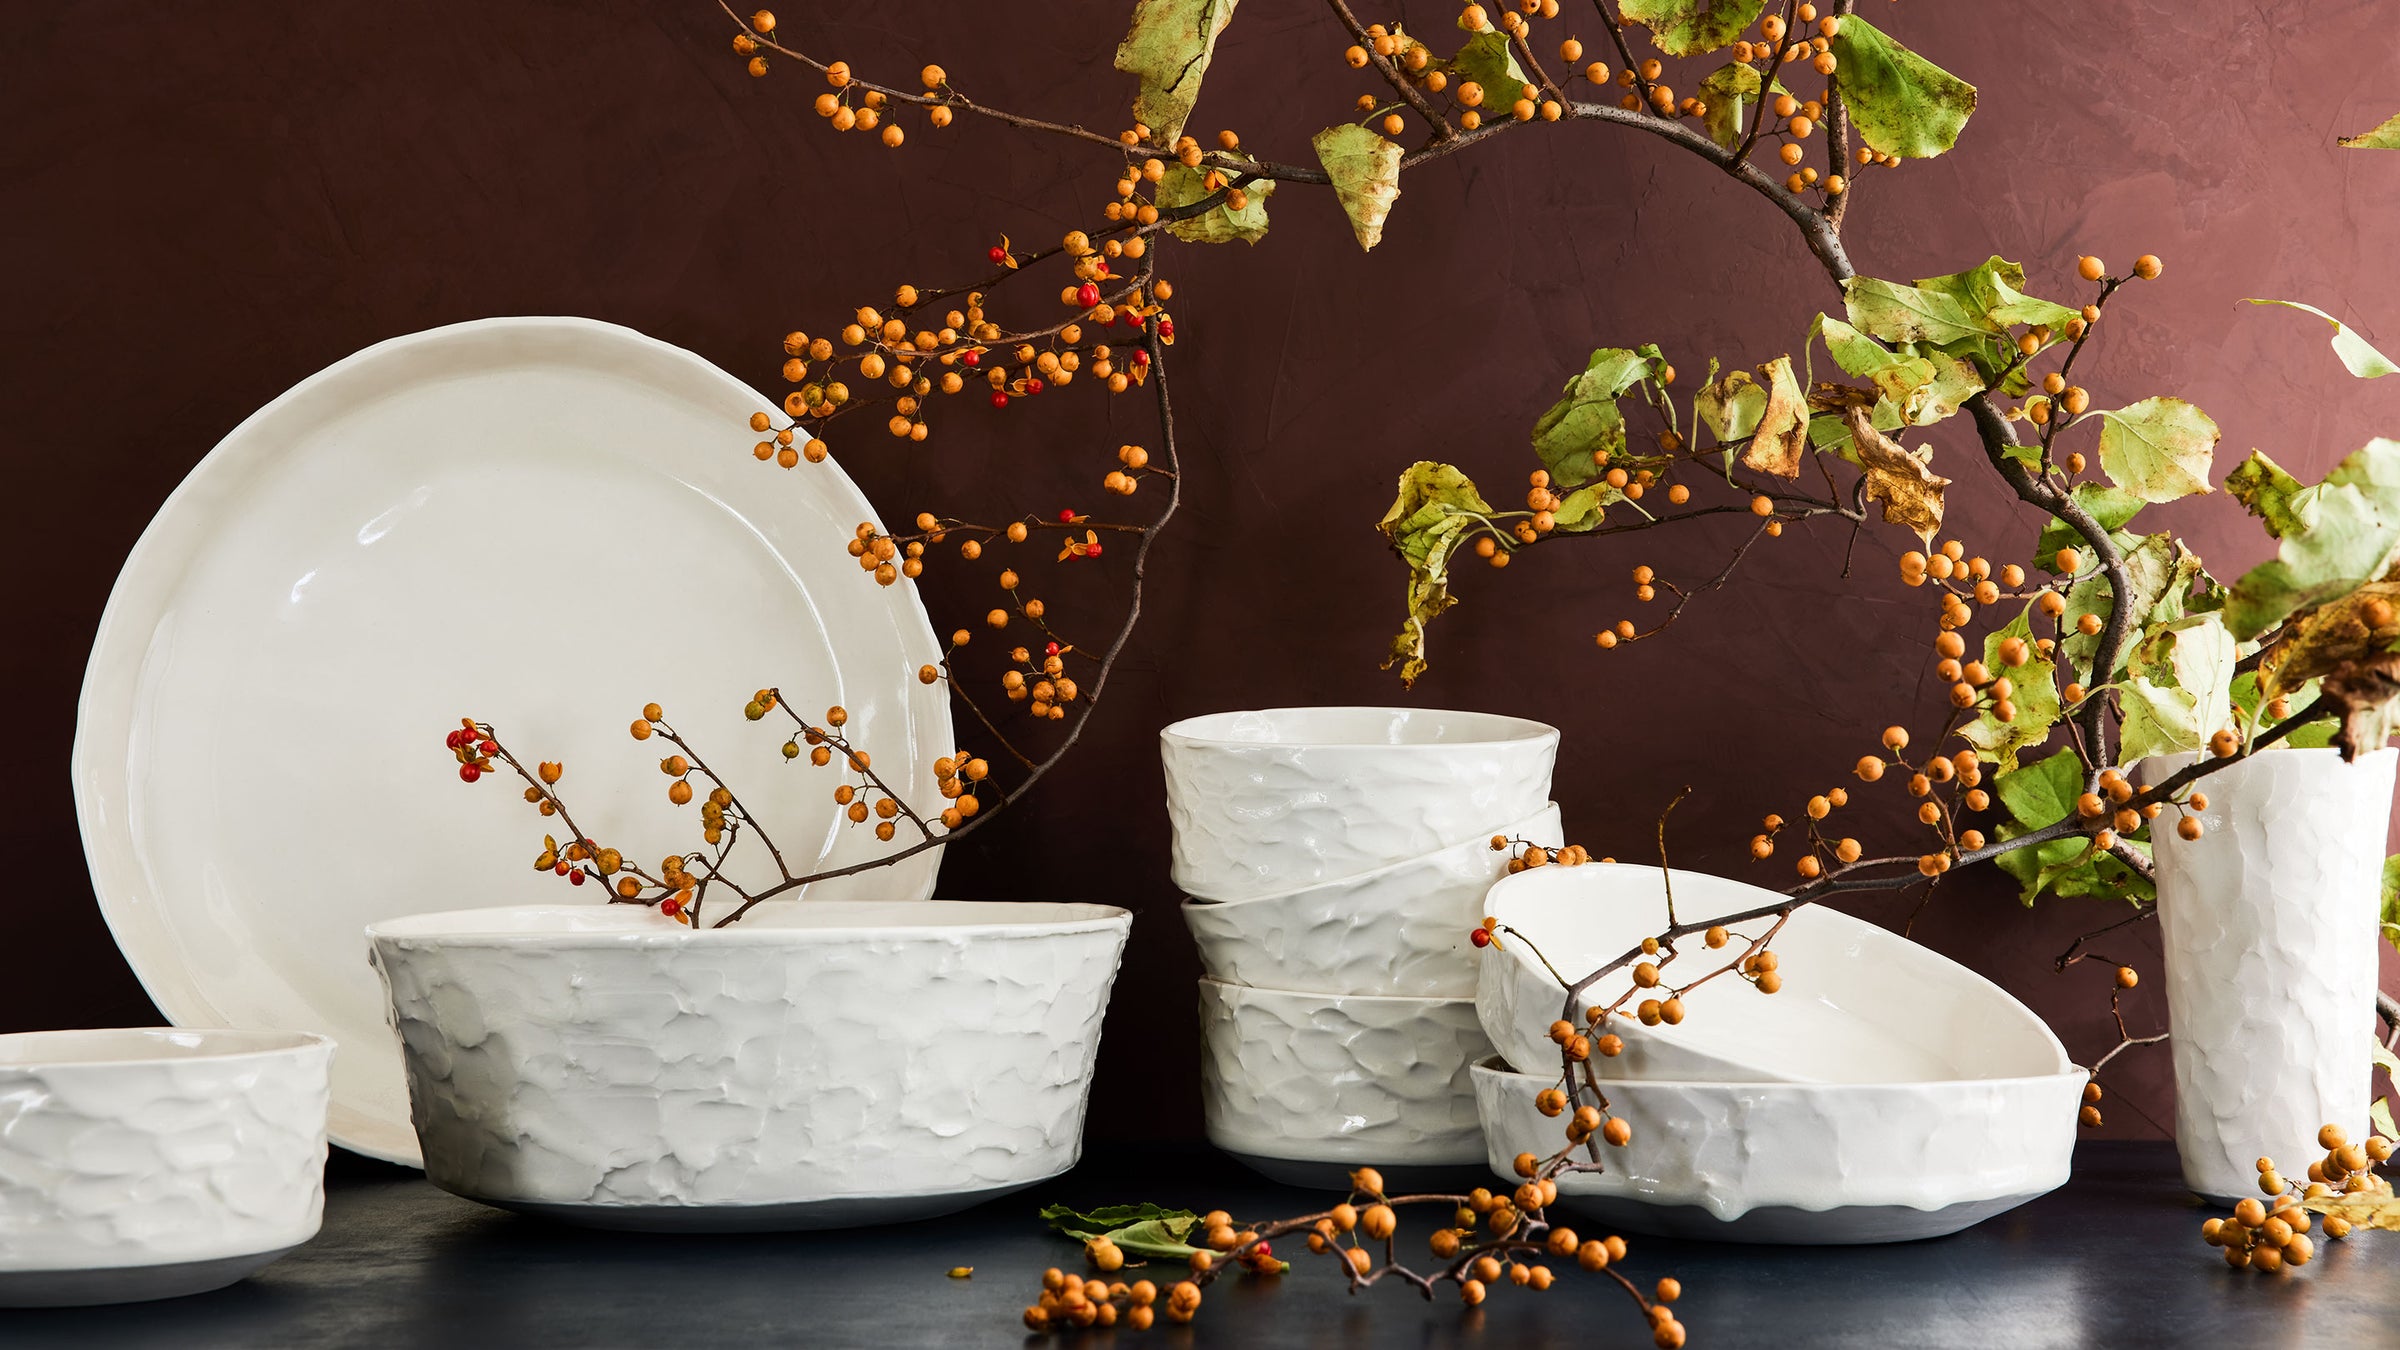 dbo home handmade stucco textured ceramic bowls, platters, and vase with winter berries